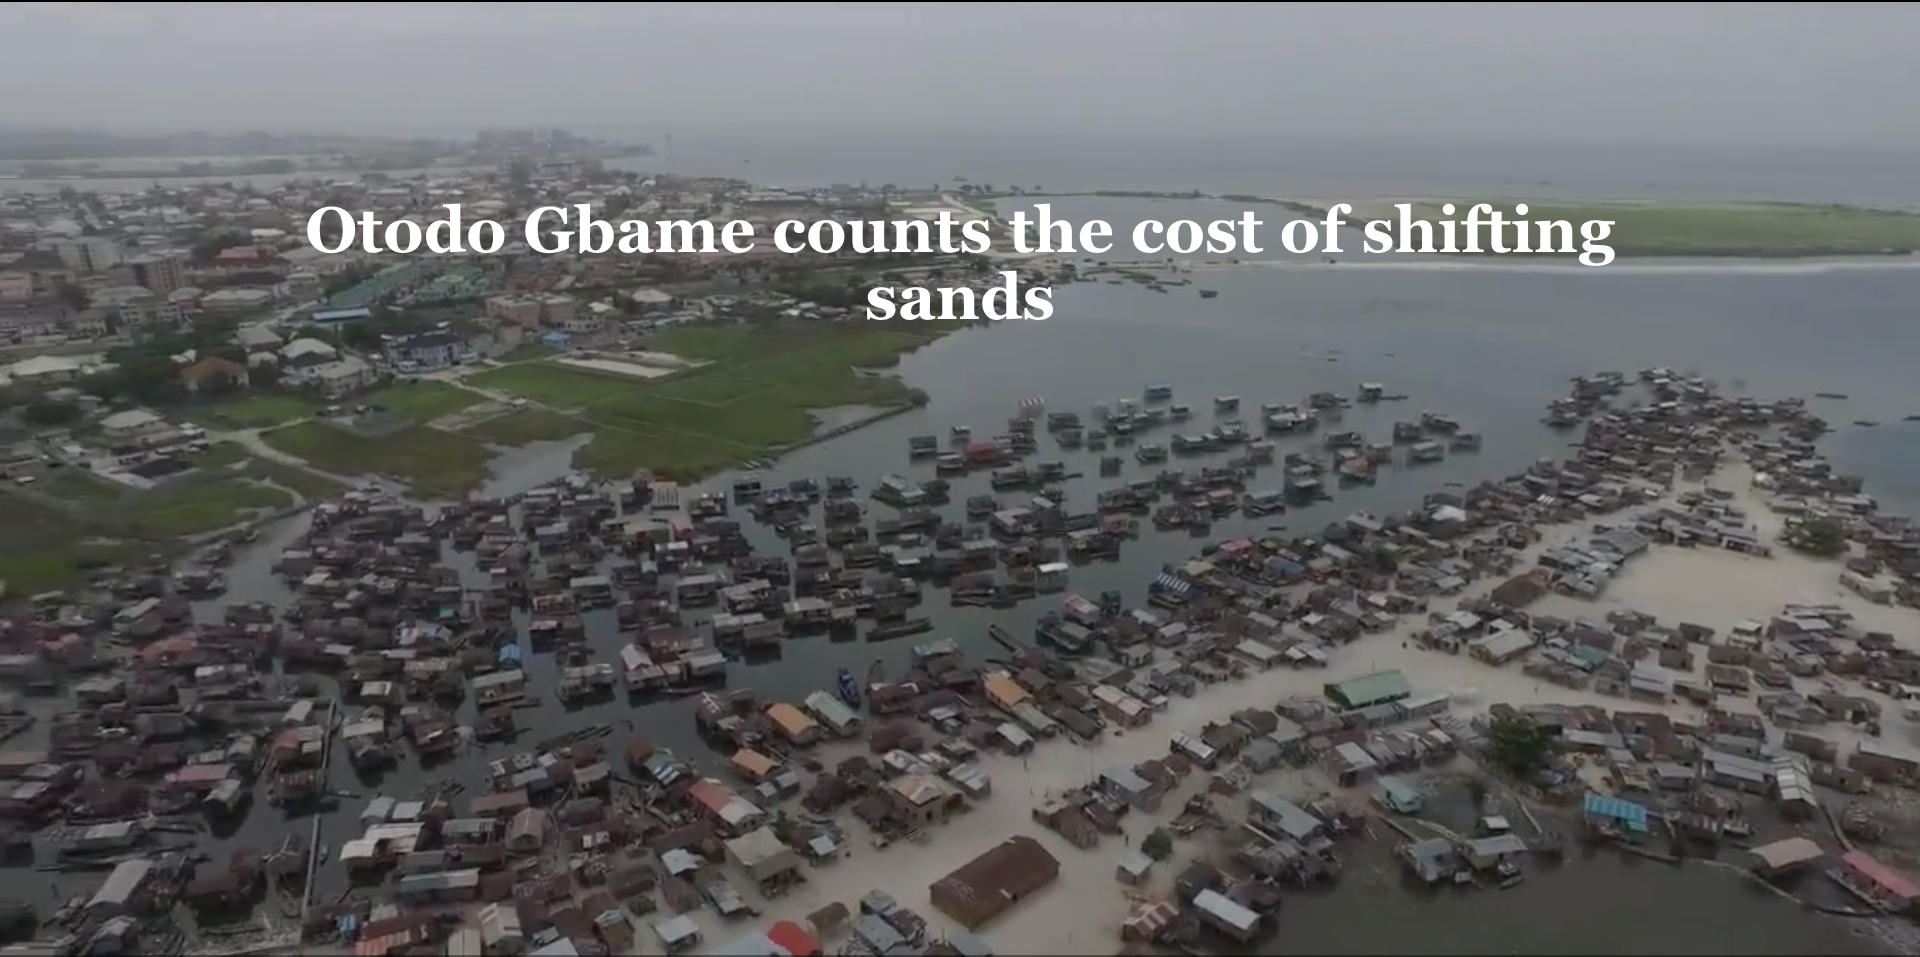 Otodo Gbame before being leveled in March. Drone footage by Editi Effiong. Nigeria, 2017.